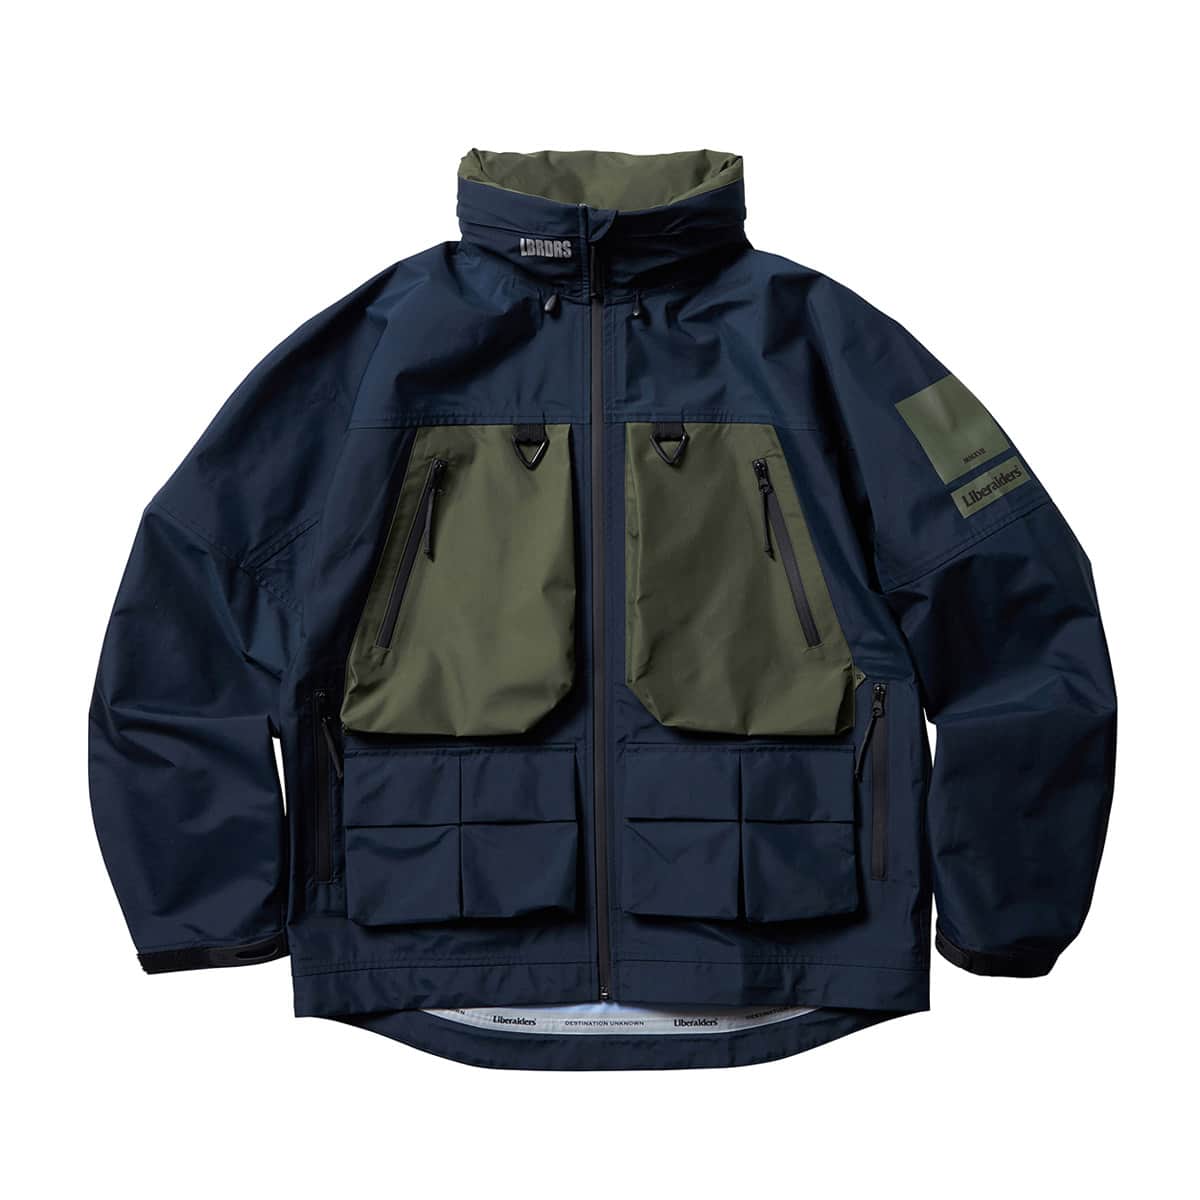 LIBERAIDERS ALL CONDITIONS 3LAYER JACKET NAVY 23FA-I